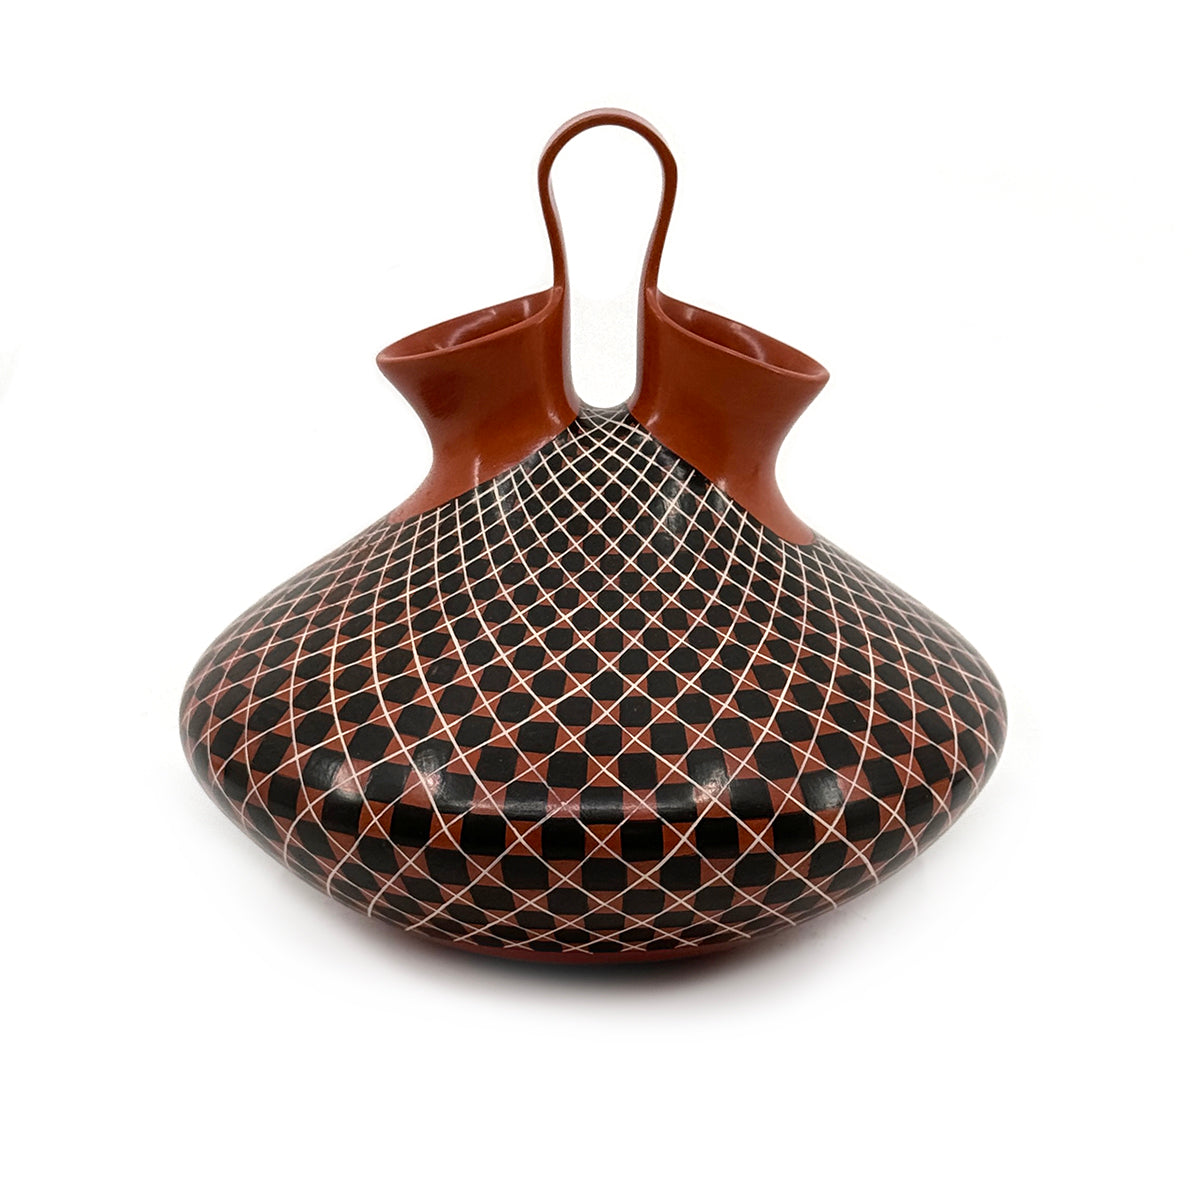 Load image into Gallery viewer, Handcrafted pot by Mata Ortiz artist Olga Quezada Thin, and lightweight pot with black geometric designs on red clay Measures approximately 6.50 inches high x 6.75 inches in diameter at widest circumference
